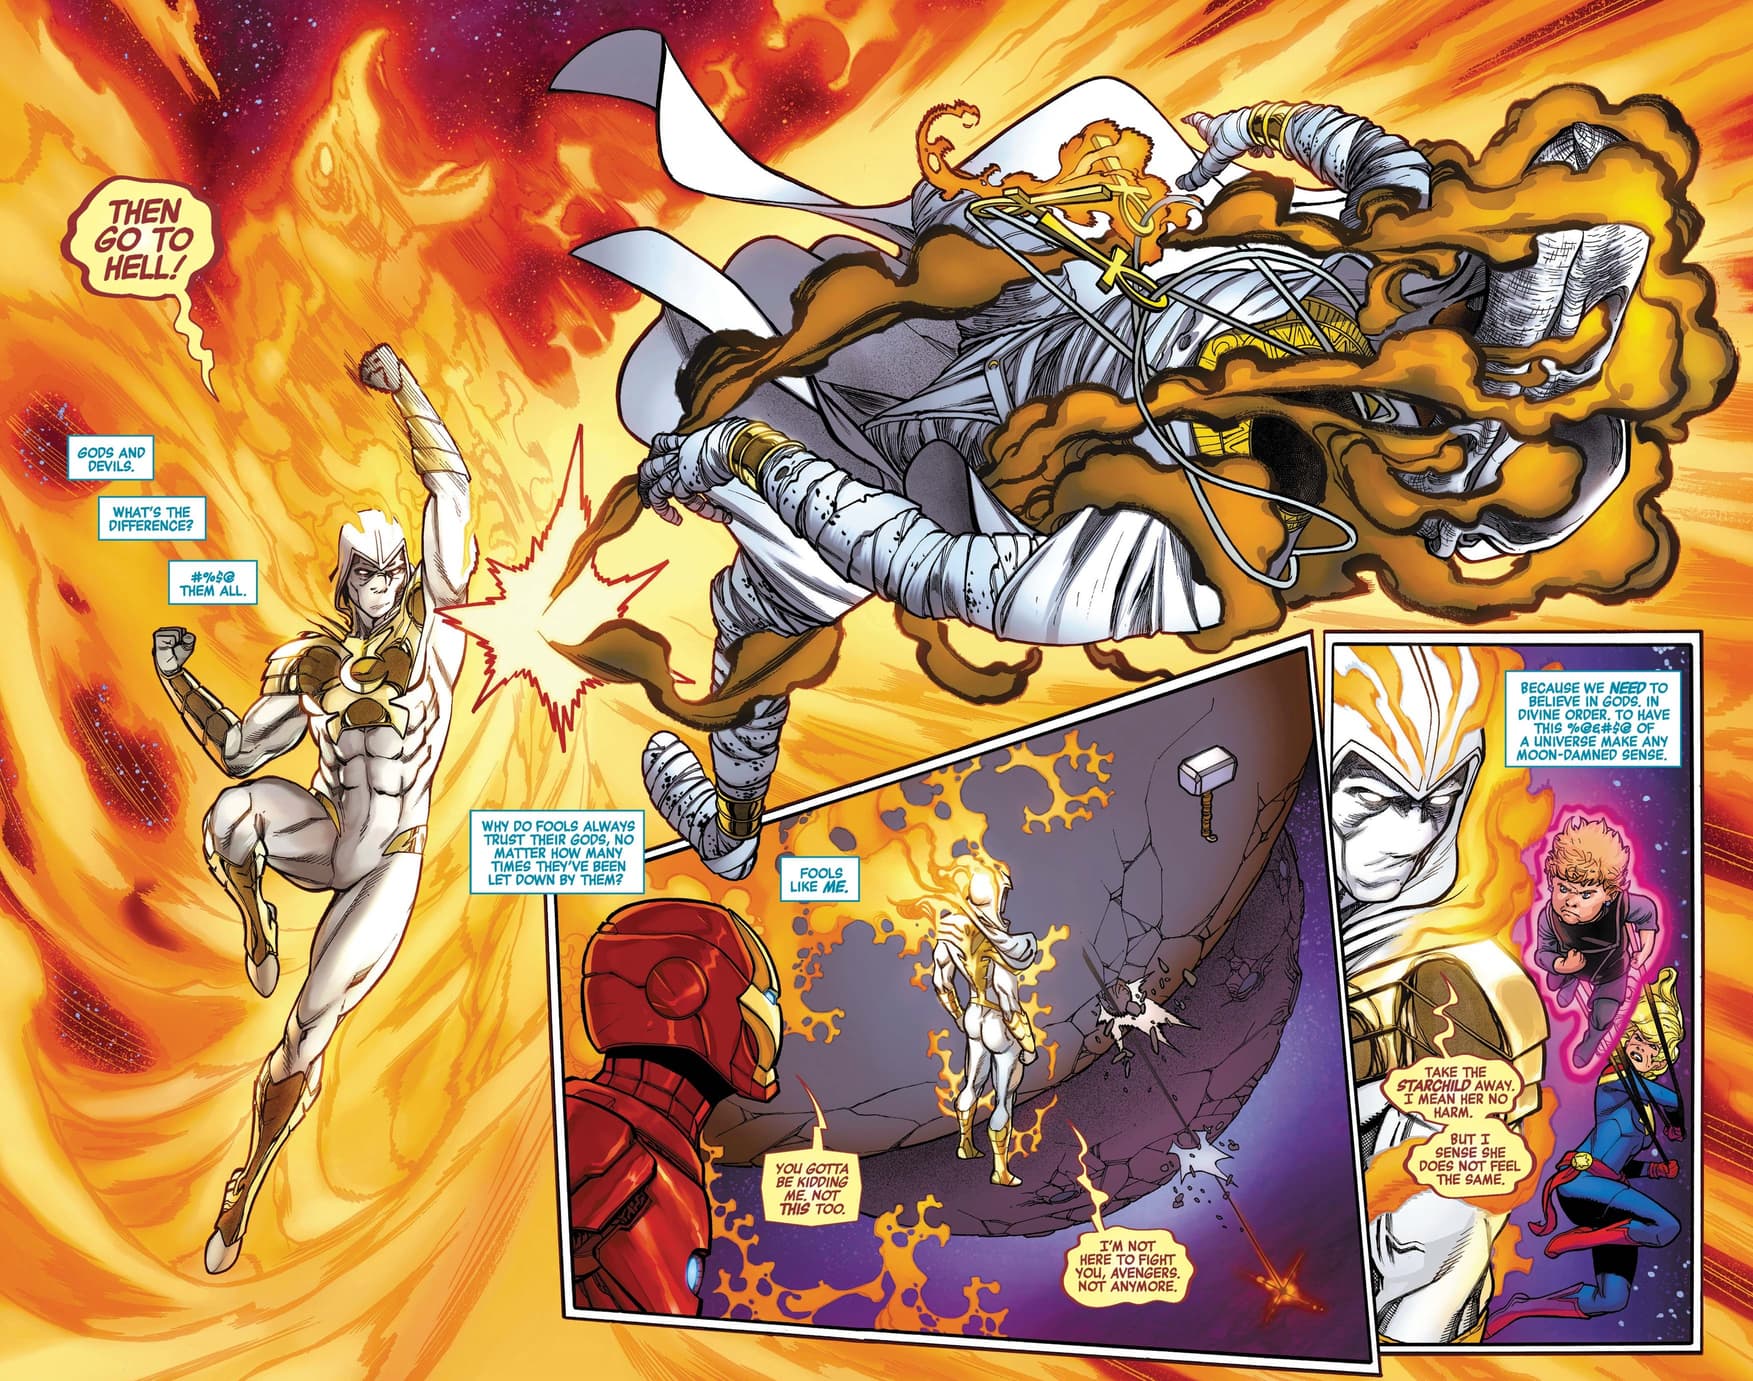 Moon Knight punches Khonshu with the power of the Phoenix.